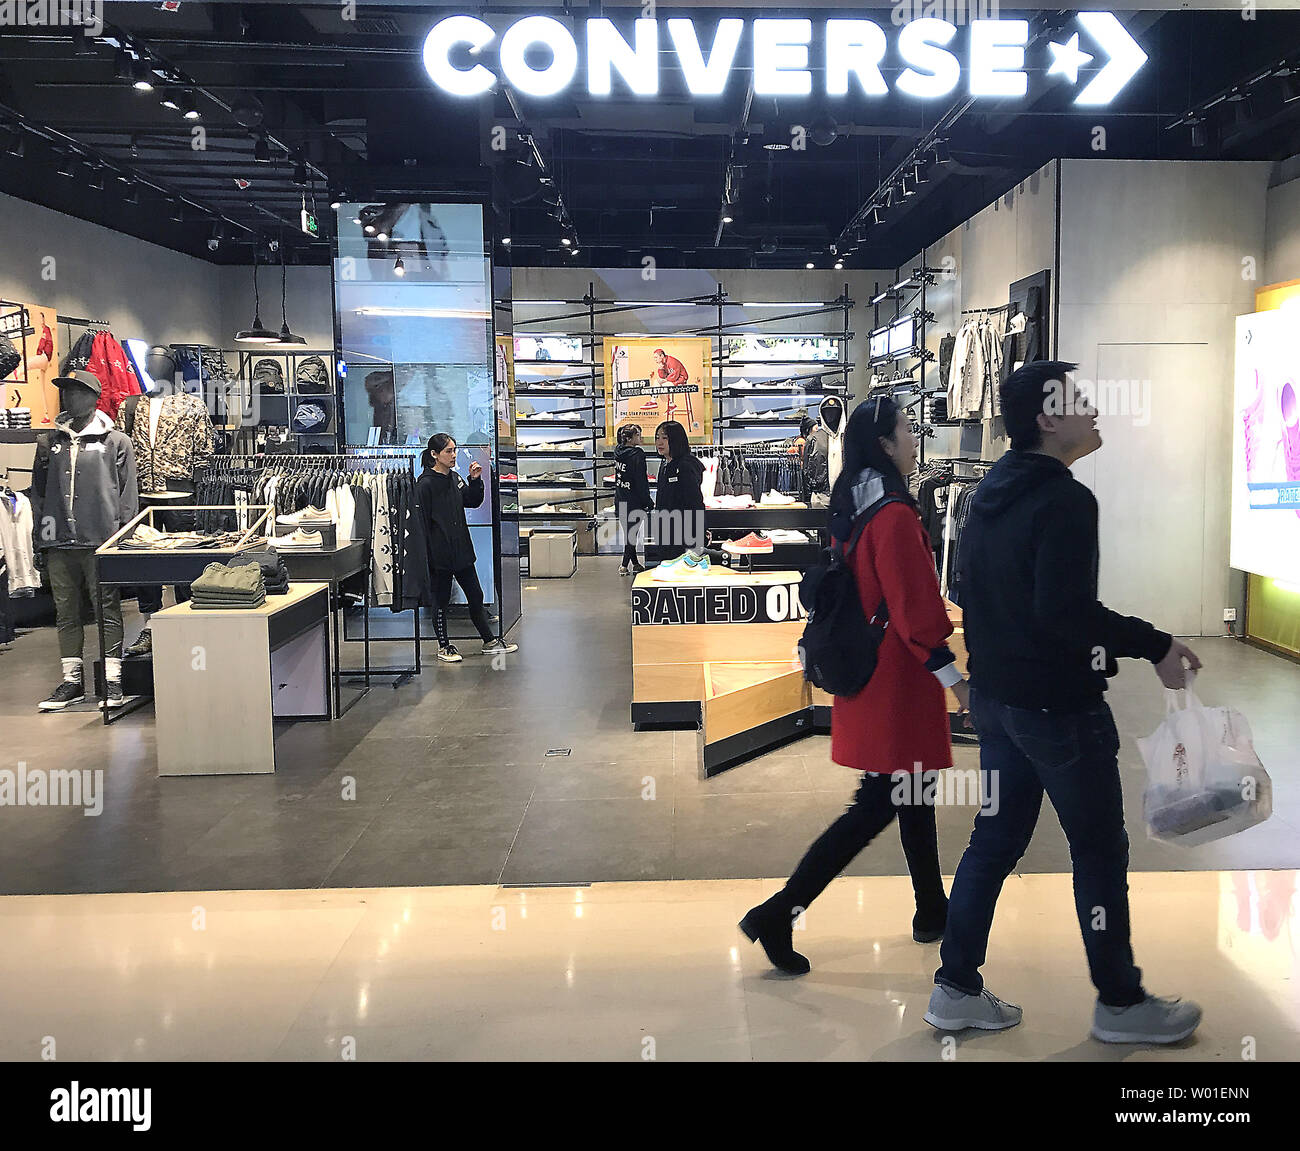 Page 2 - Converse Store High Resolution 